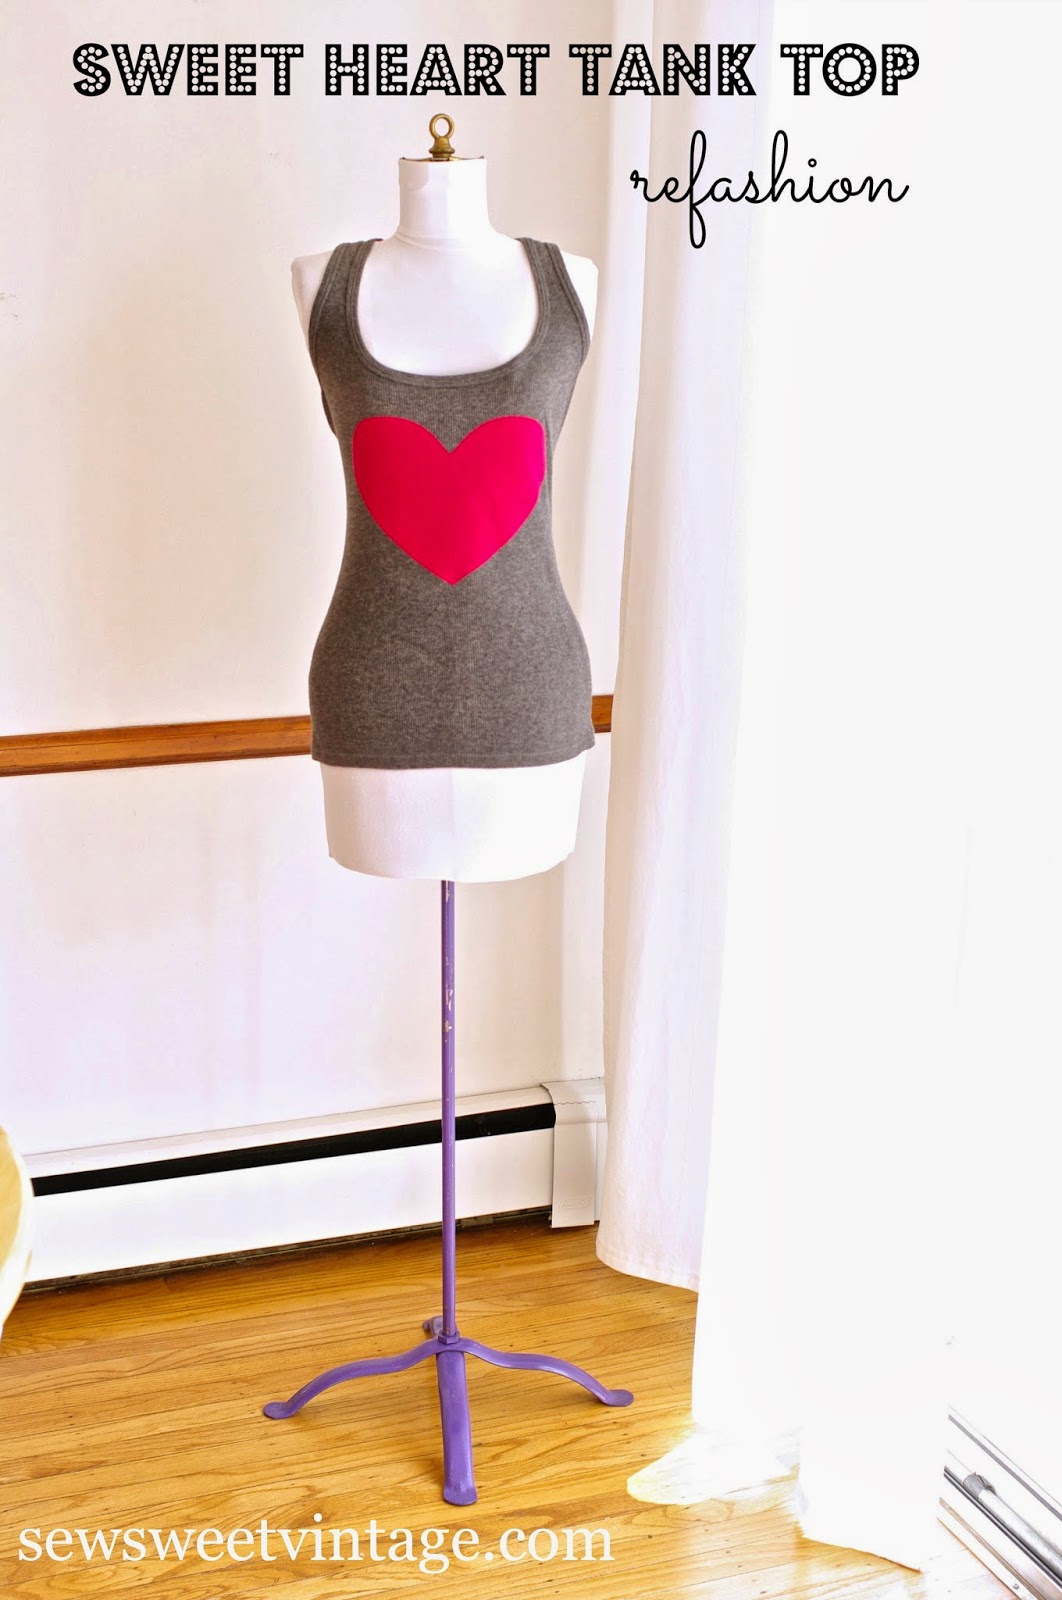 DIY heart tank top refashion for Valentine's Day by sewsweetvintage.com